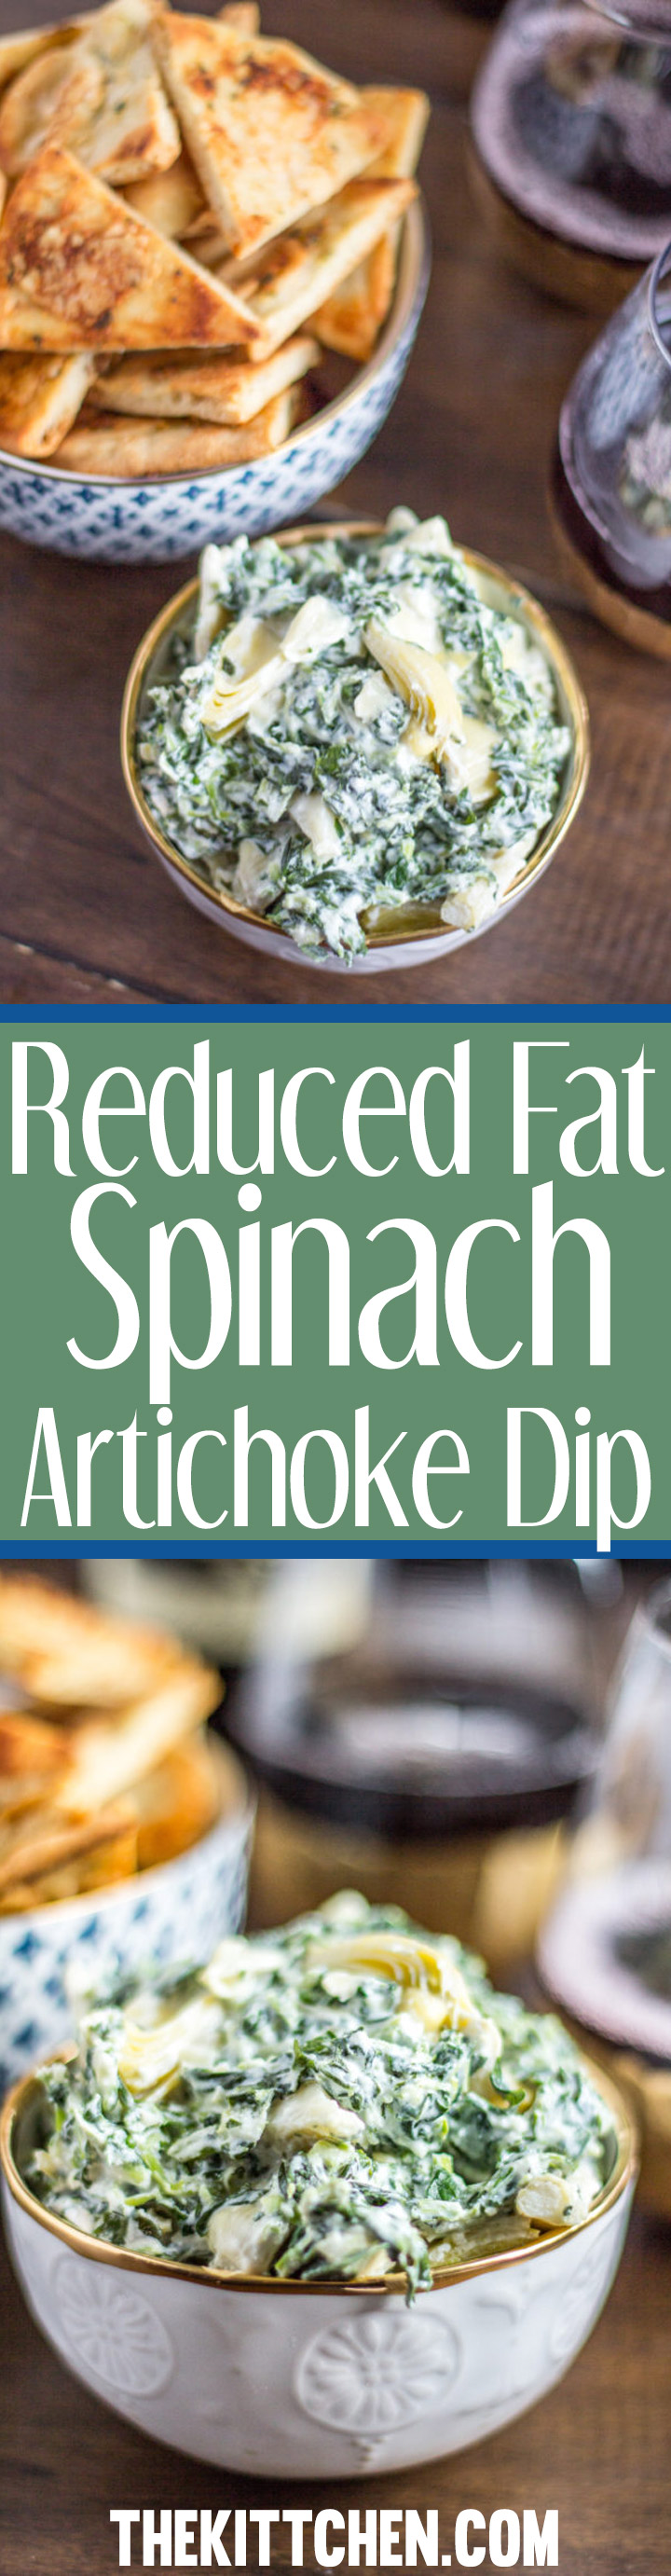 A healthy twist on a classic recipe, this Reduced Fat Spinach Artichoke Dip is irresistibly delicious. The best part is that you can prepare this easy appetizer in less than 10 minutes.